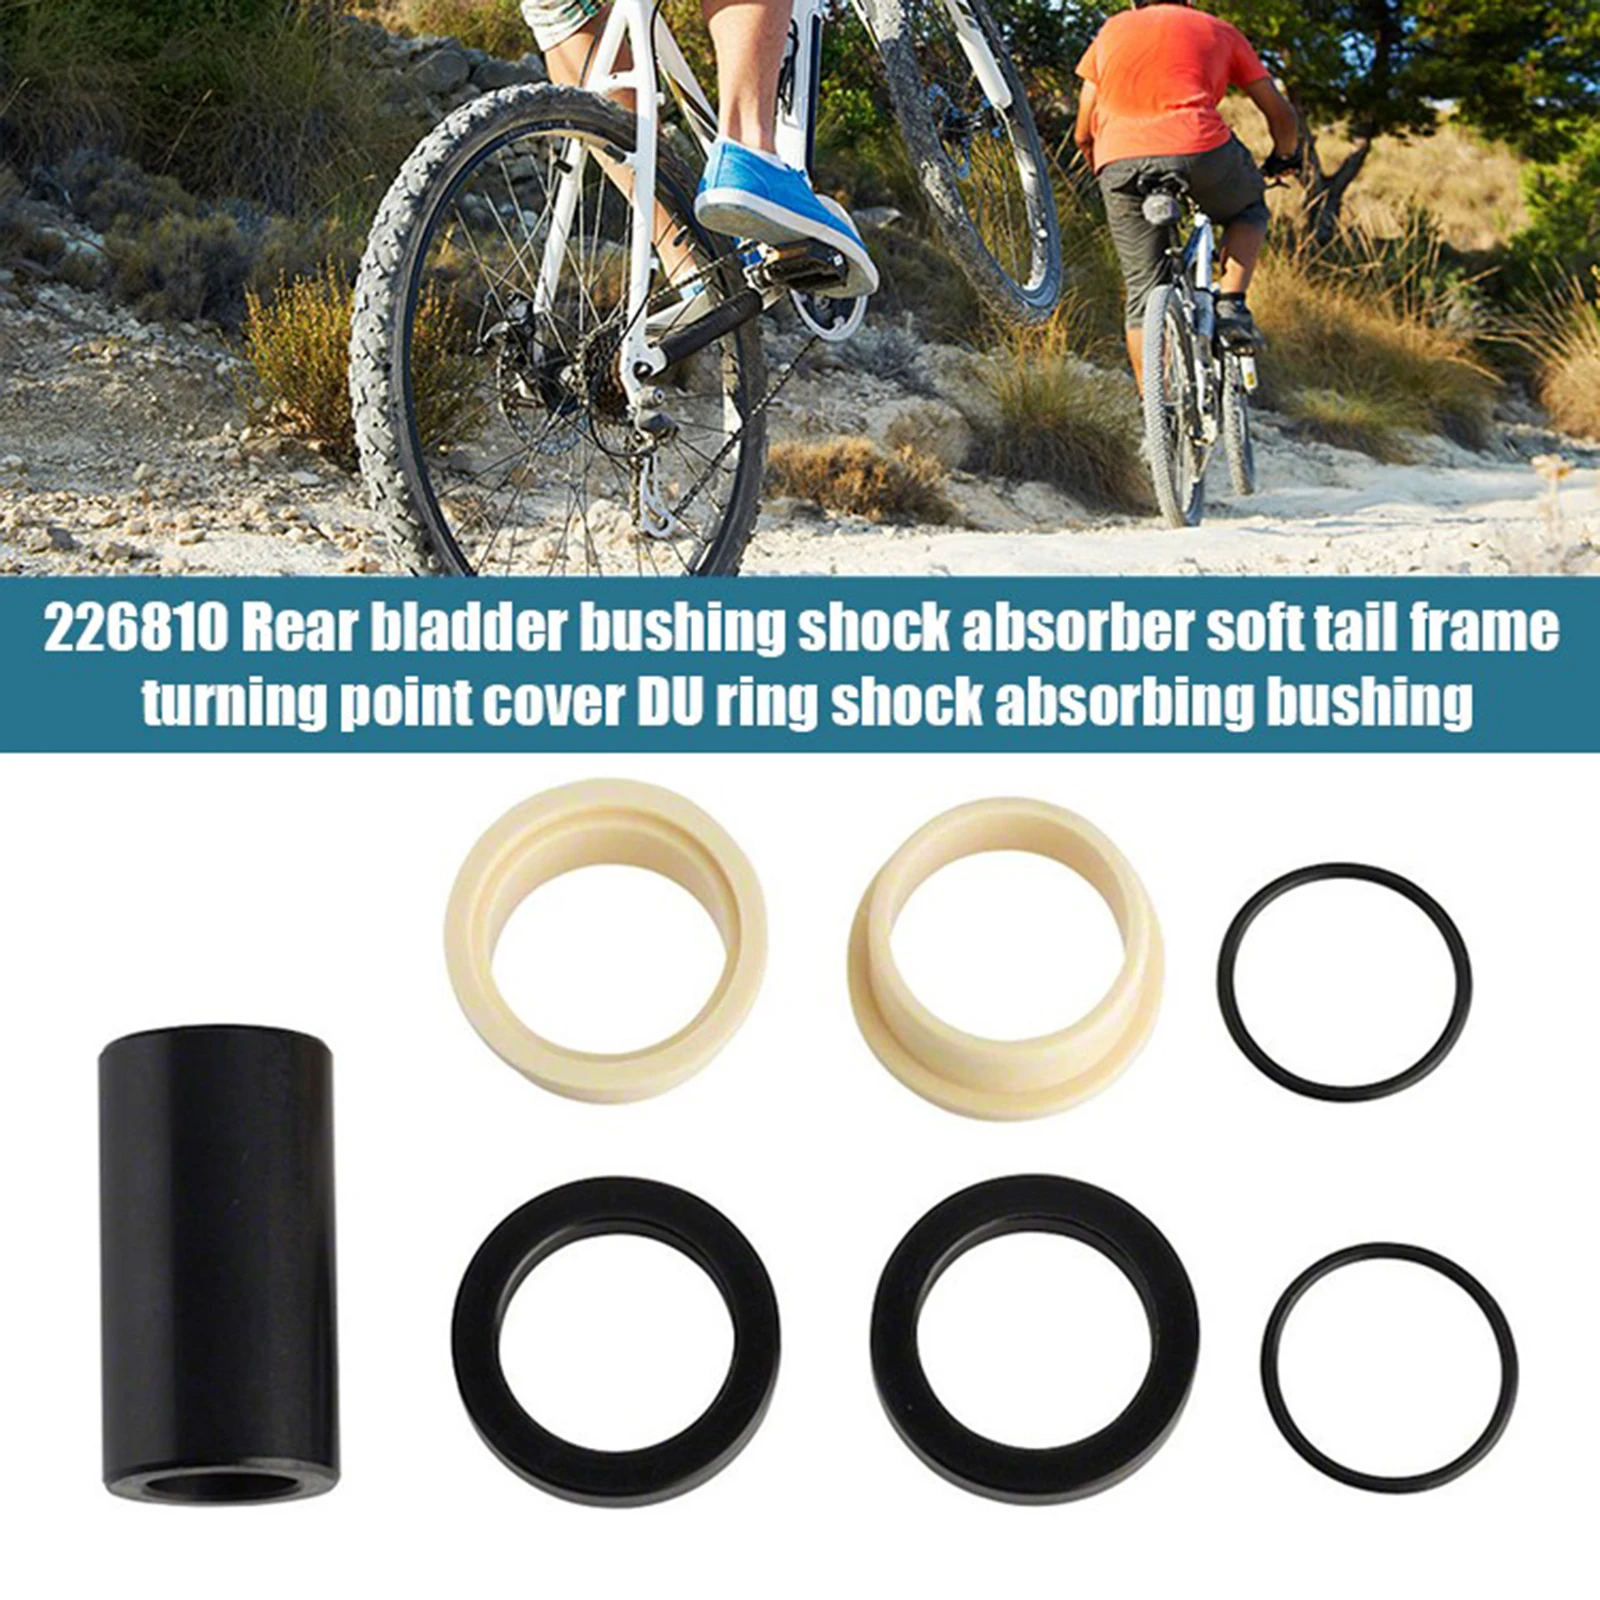 Mountain Bicycle Bushing Soft Tail Rear Shock Mount Shock Absorber Absorption Bushing Tube Turn Point Riding Cycling Tackles